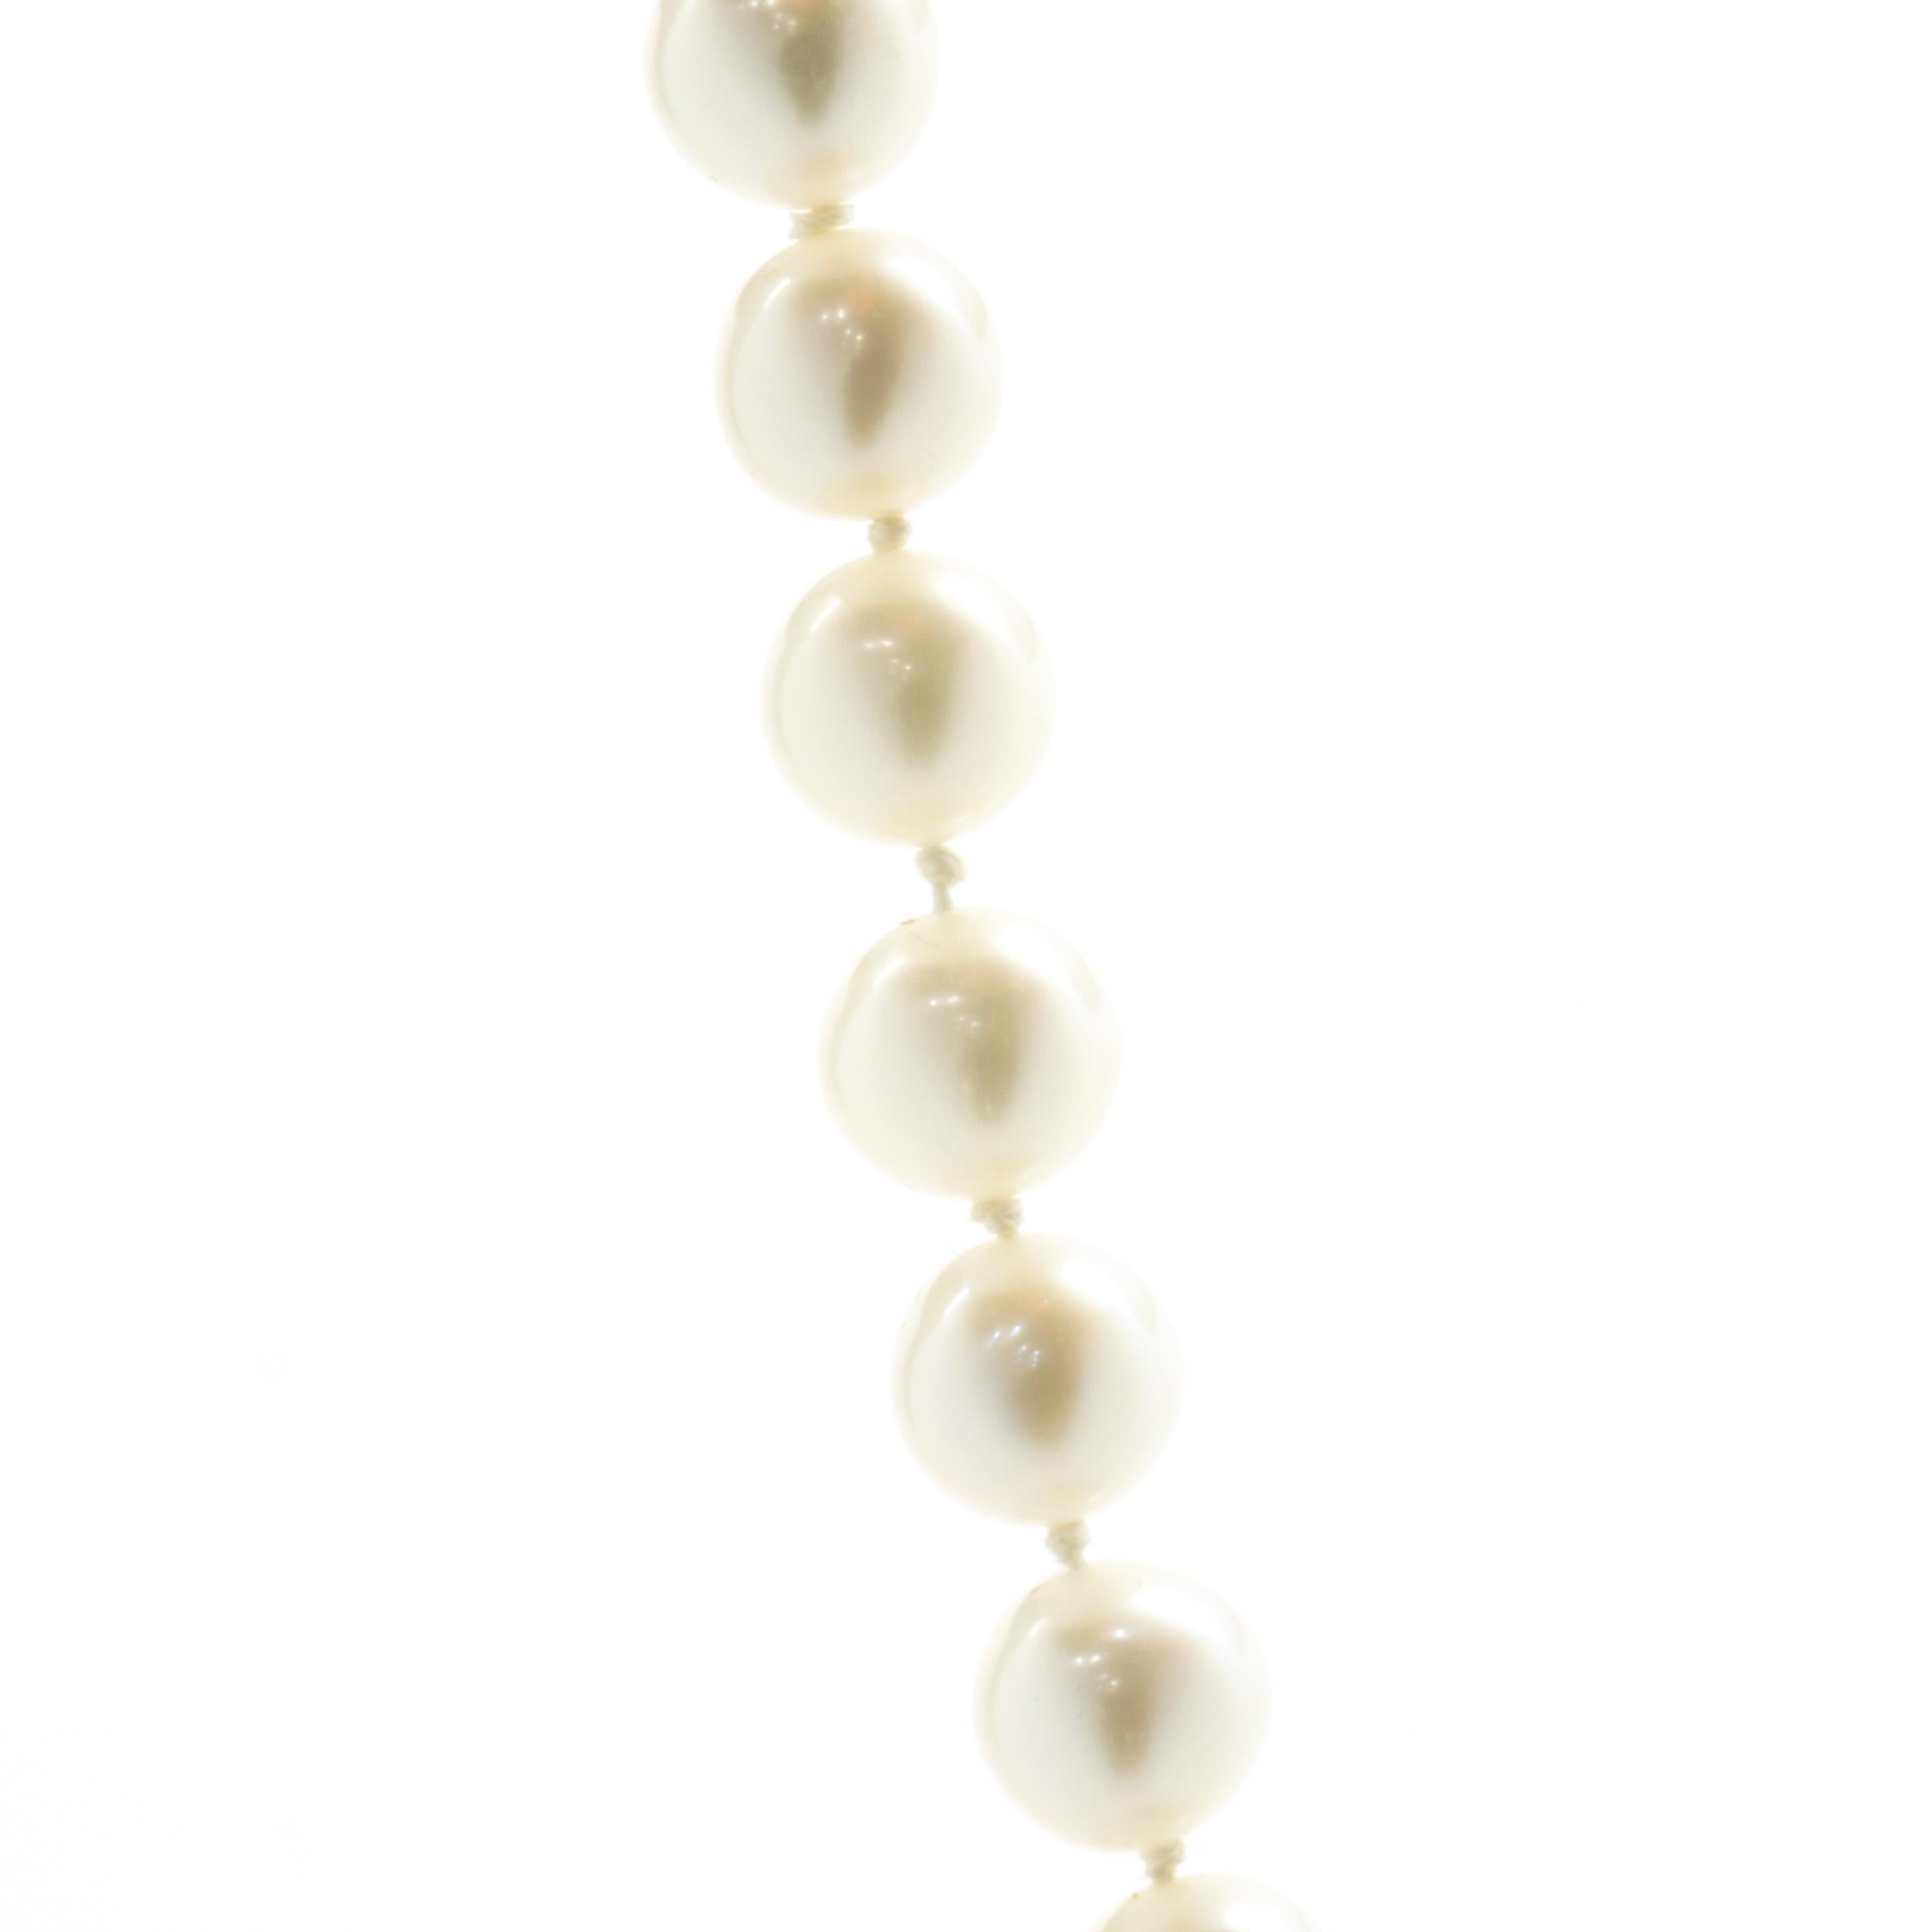 Designer: Mikimoto
Material: 14K yellow gold
Weight: 25.00 grams
Dimensions: necklace measures 18.75-inches
